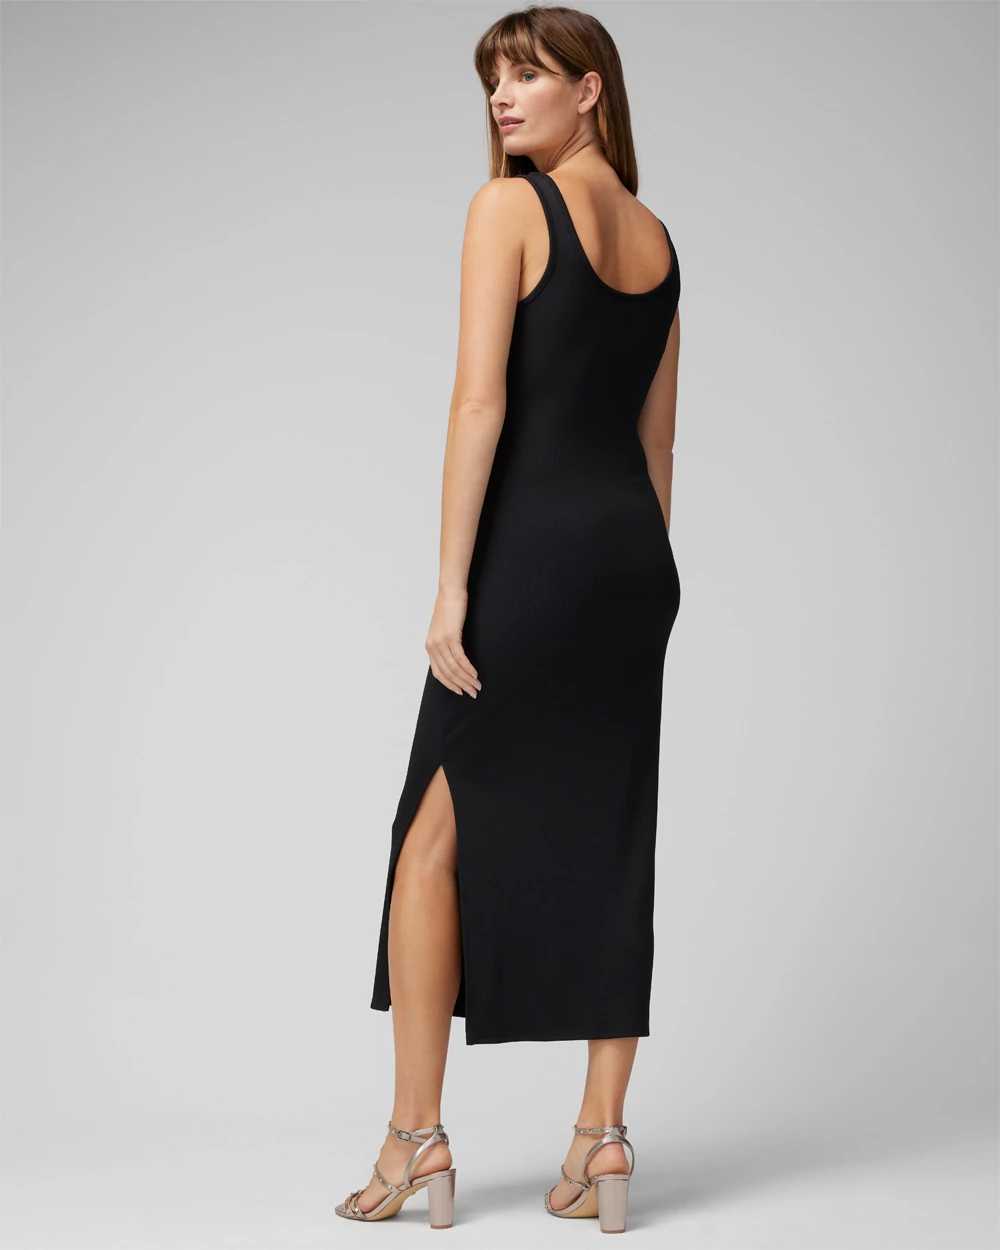 WHBM® FORME Rib Scoopneck Dress click to view larger image.